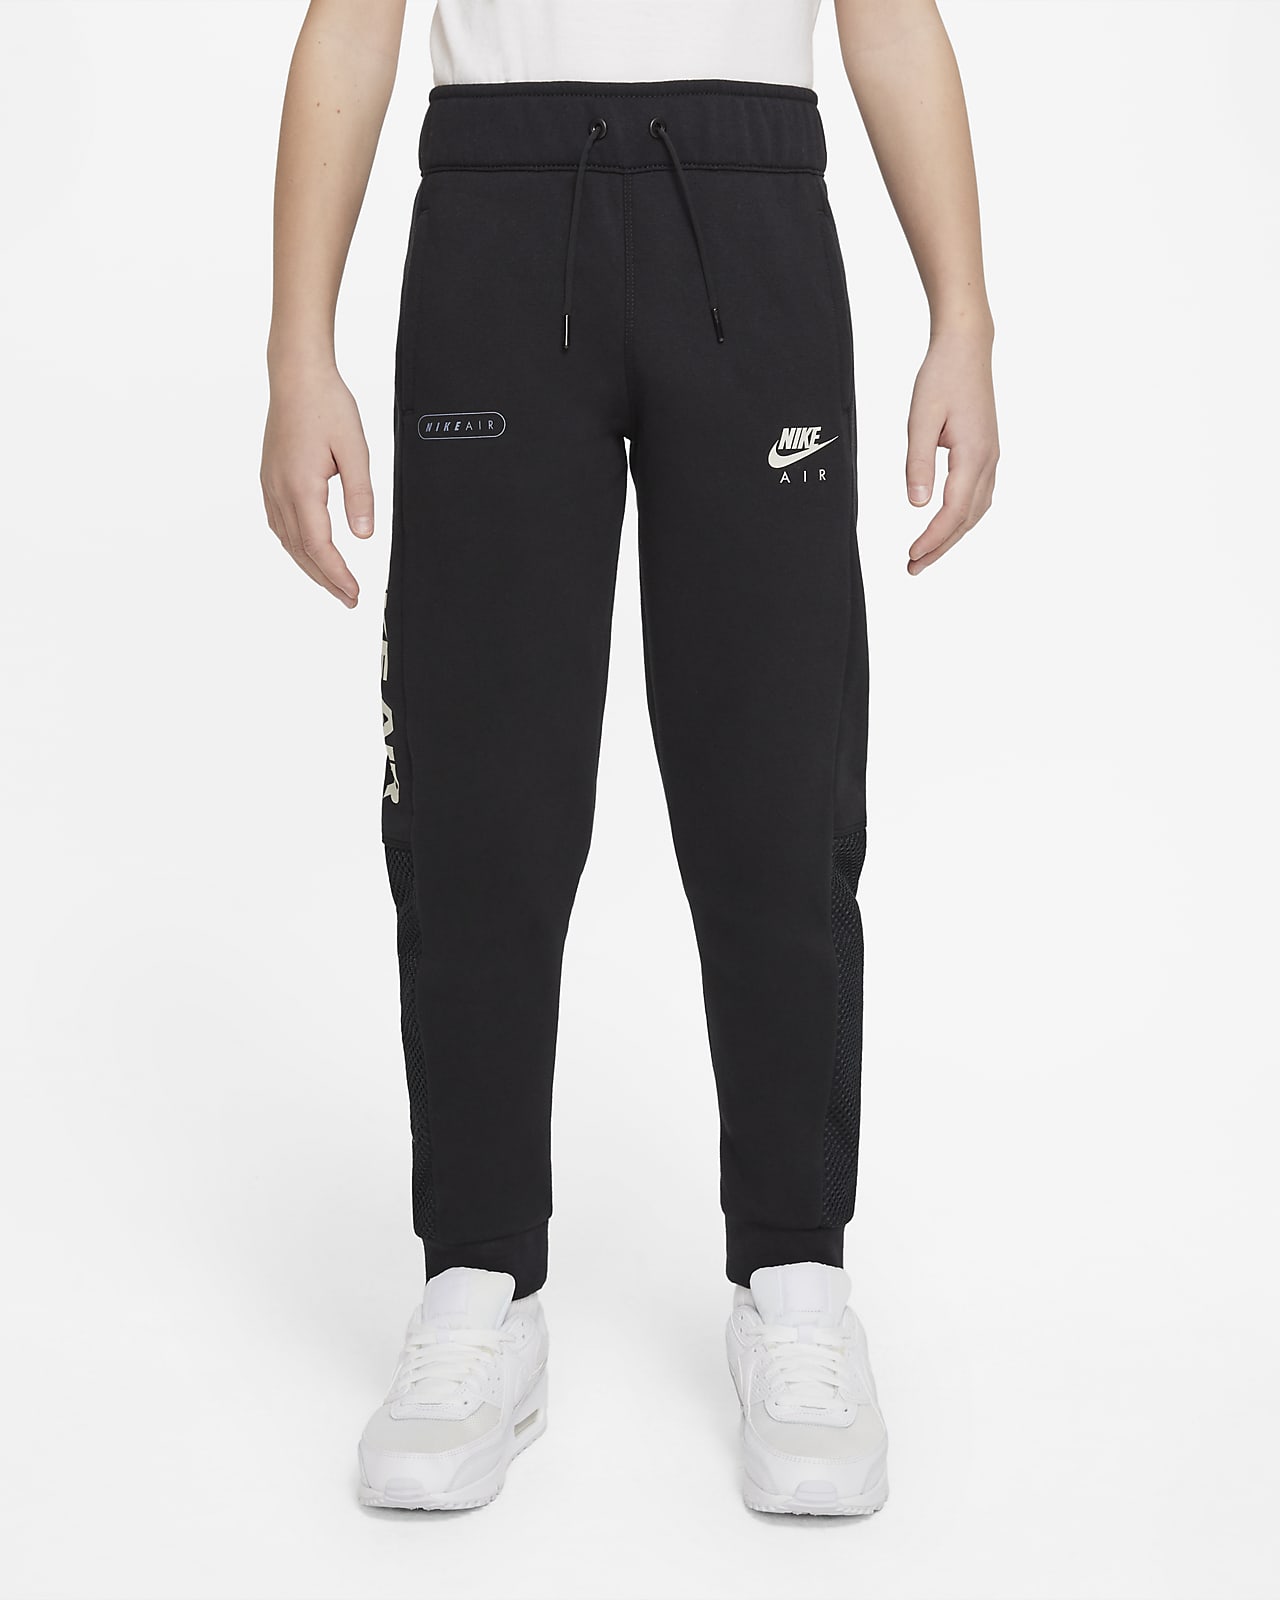 competencia Noche Vacante Nike Air Older Kids' (Boys') Trousers. Nike CZ